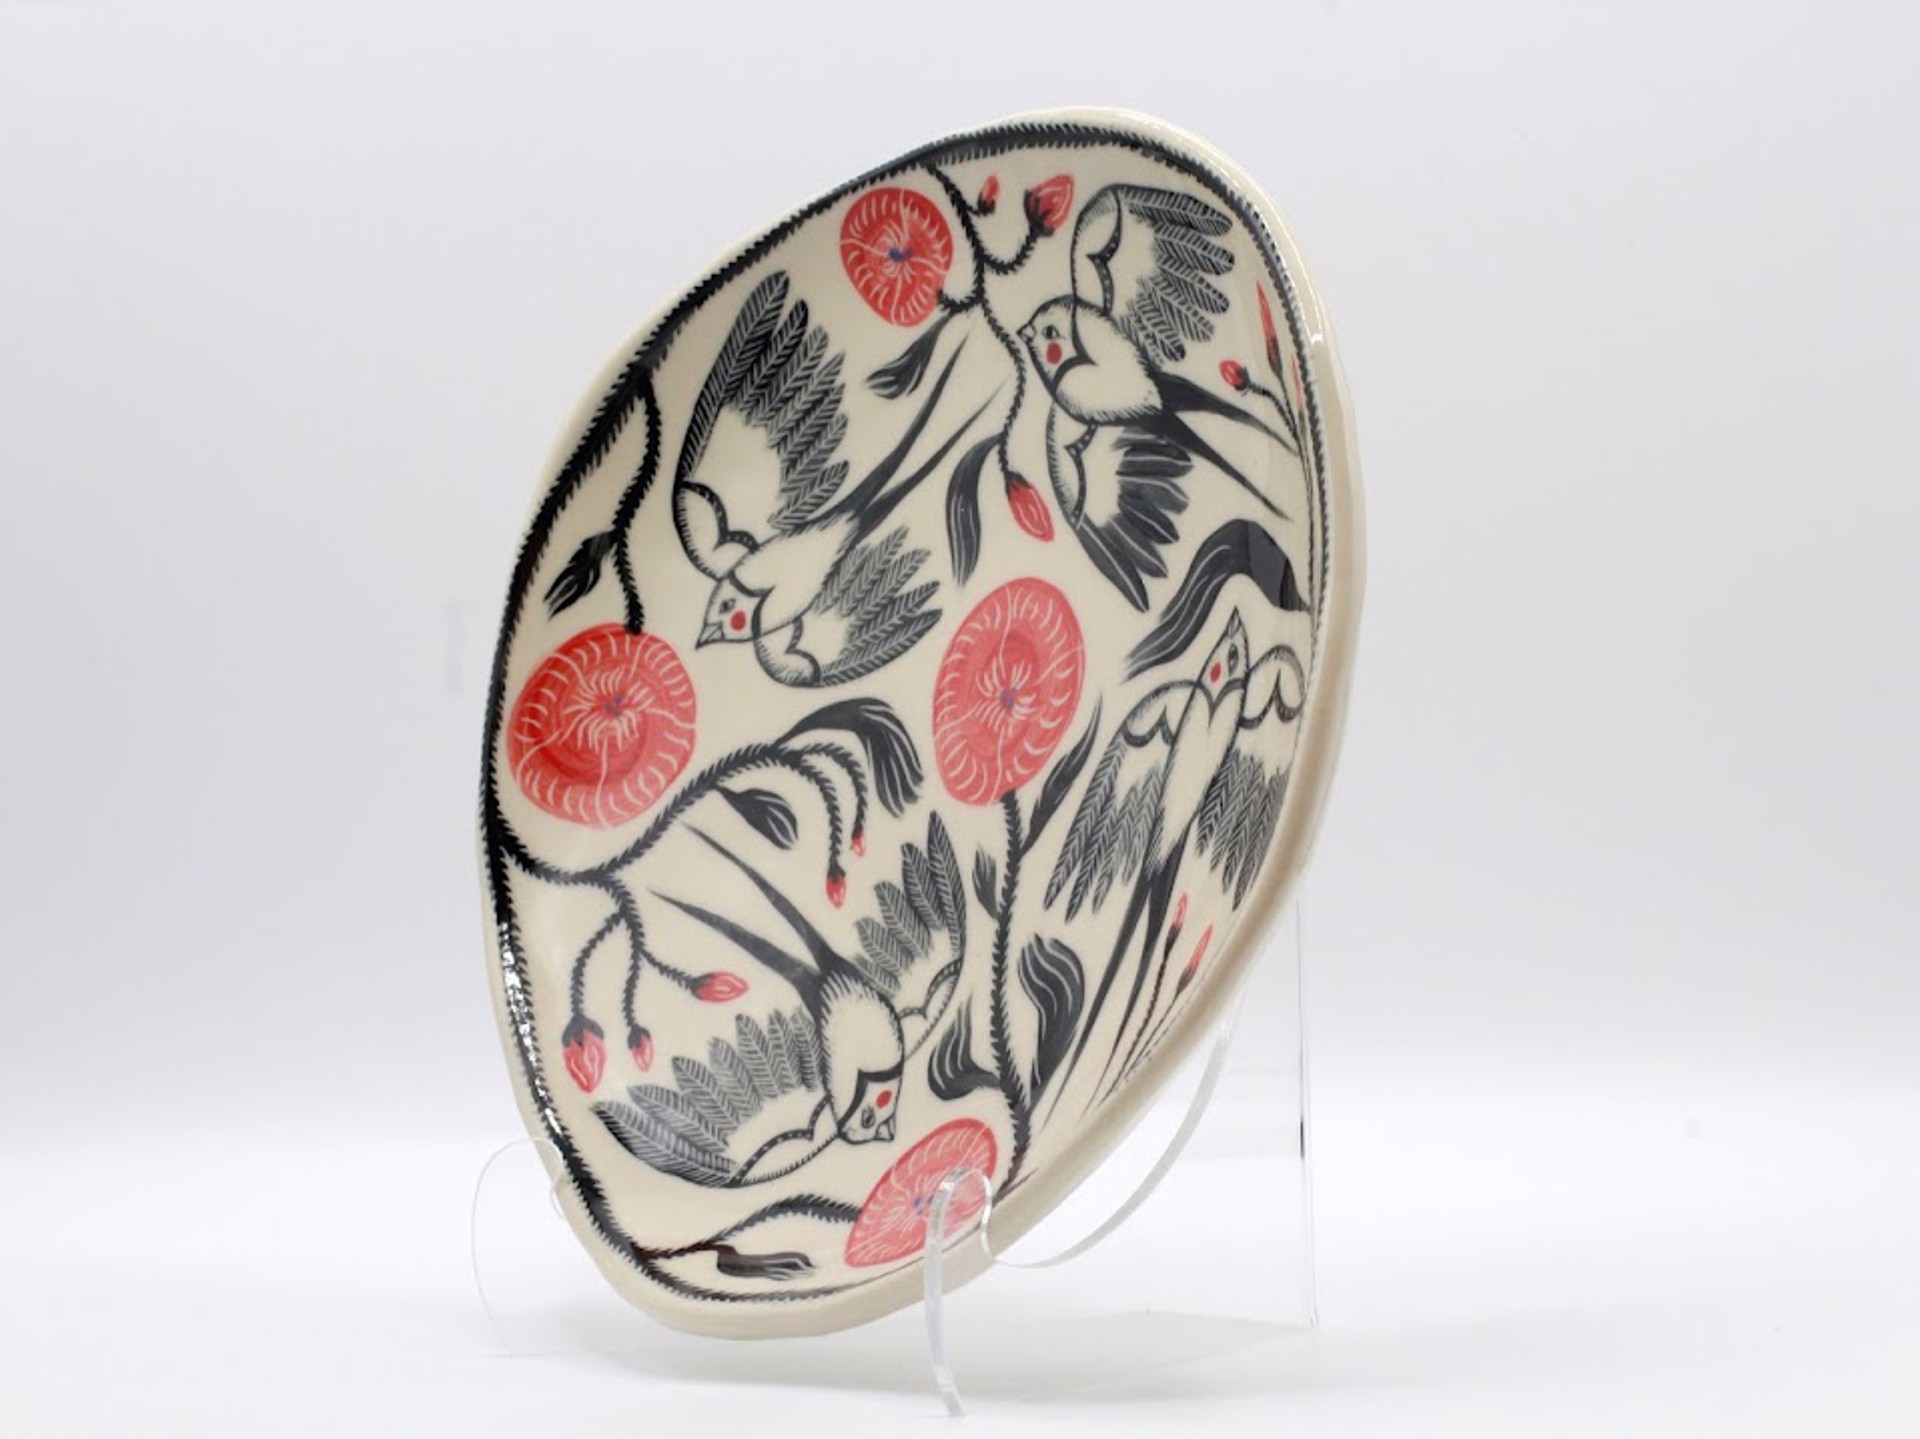 4 Swallow Decorative Plate by Christine Sutton